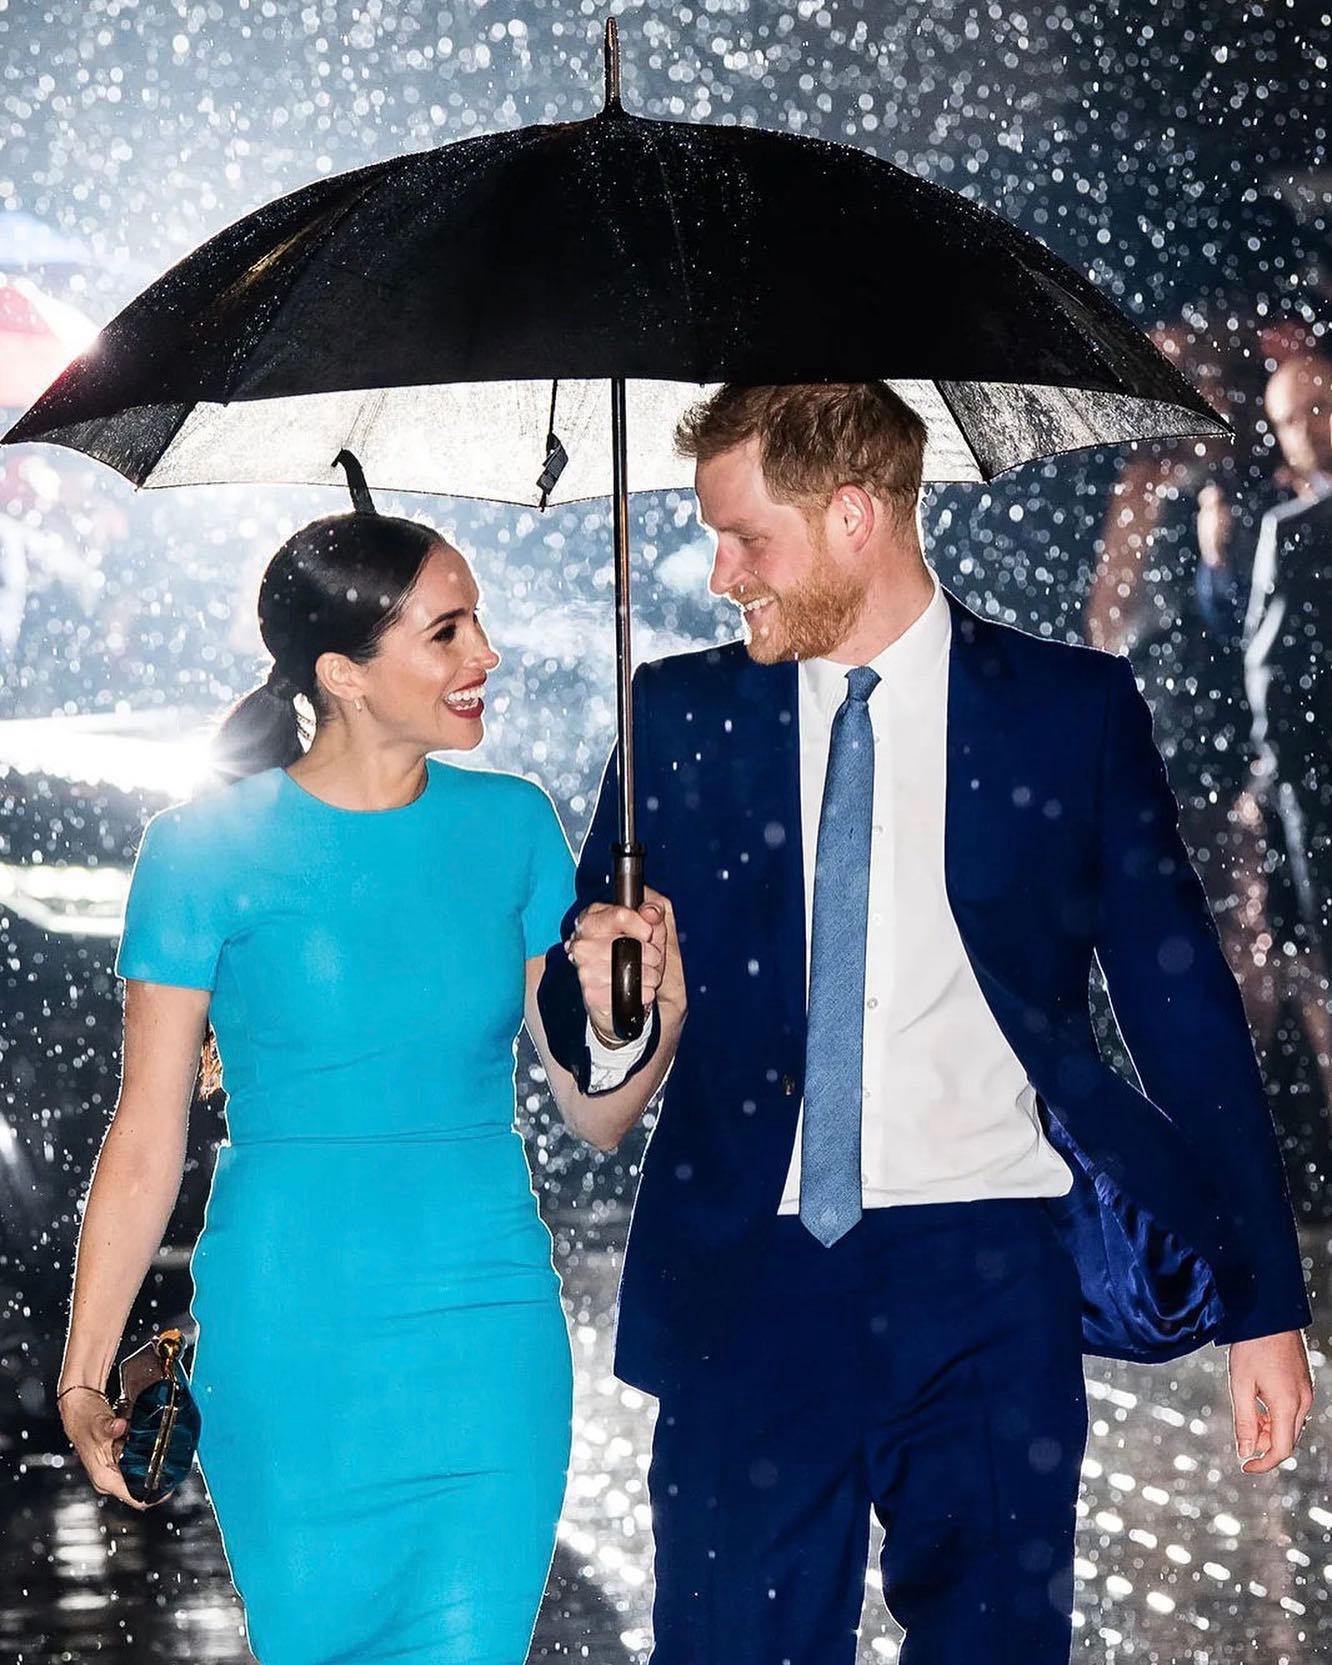 Vanities - Prince Harry and Meghan Markle stunned the world when they announced their royal exit